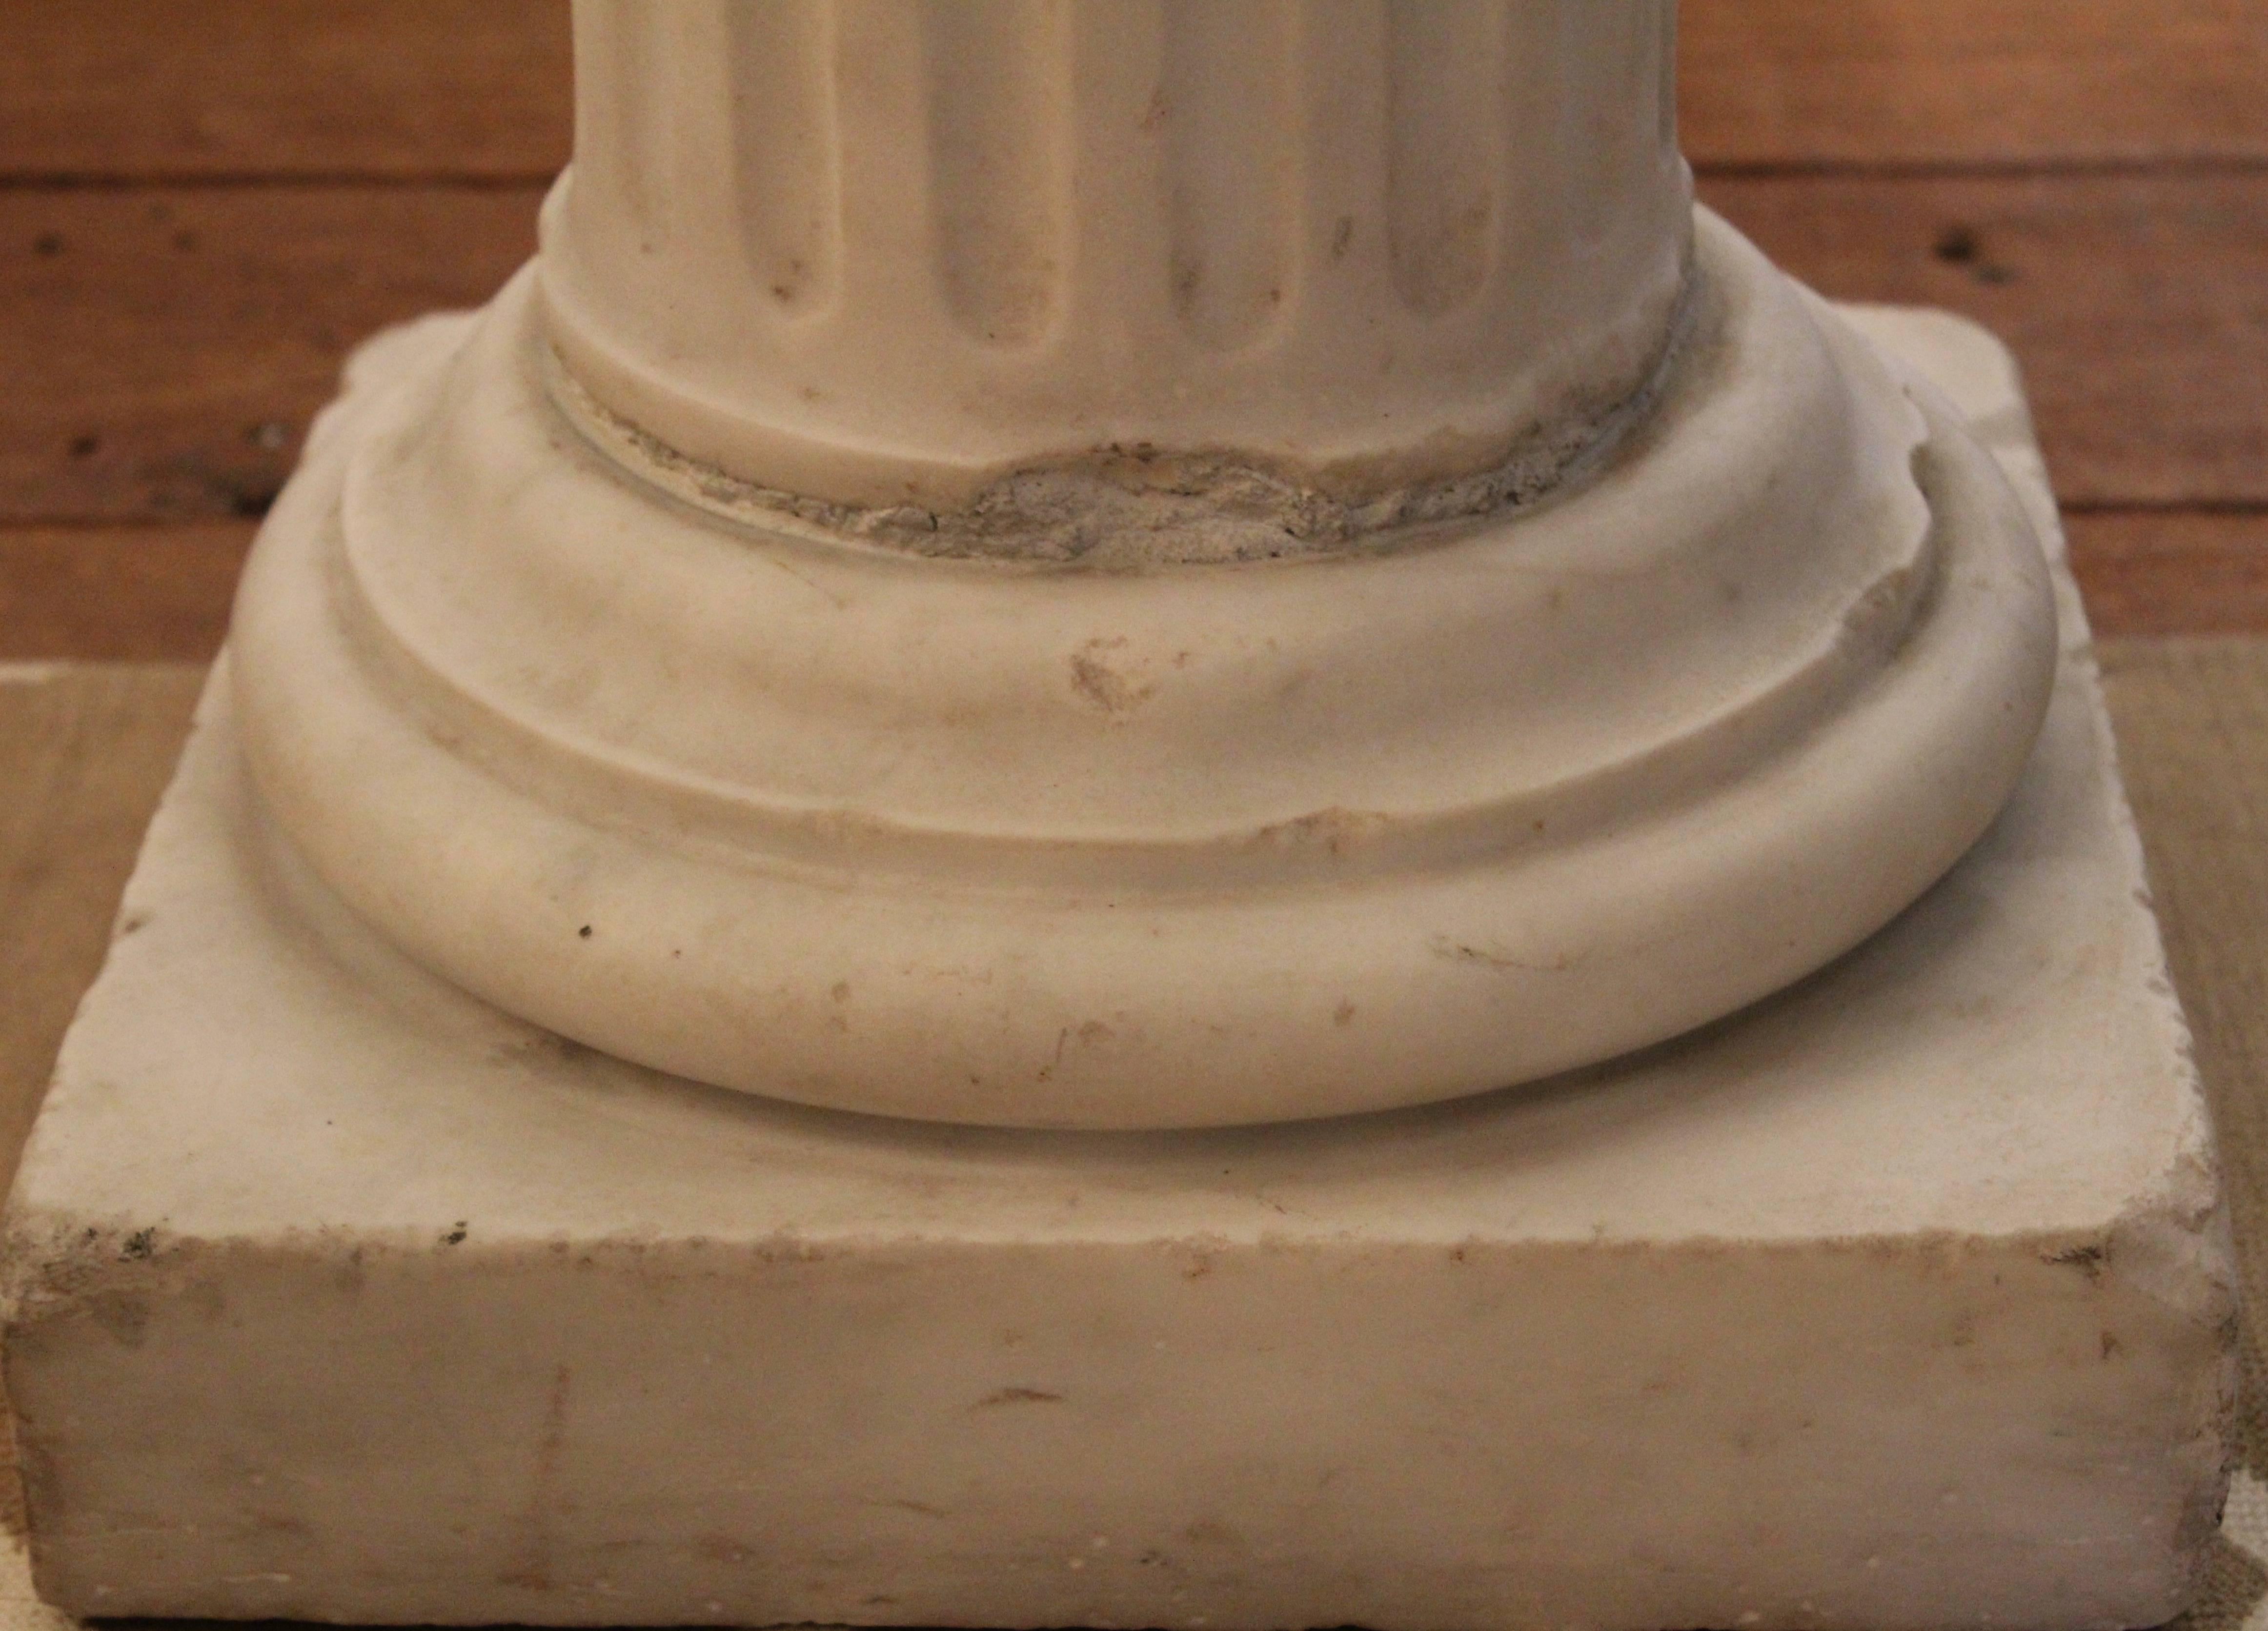 Very fine Grand Tour rectangular Neapolitan Italian Carrara marble font, top 18th century, later 19th century base. The base formed of a simple short plinth beneath fluted column support. The rectangular body of the font, with old repairs, has a